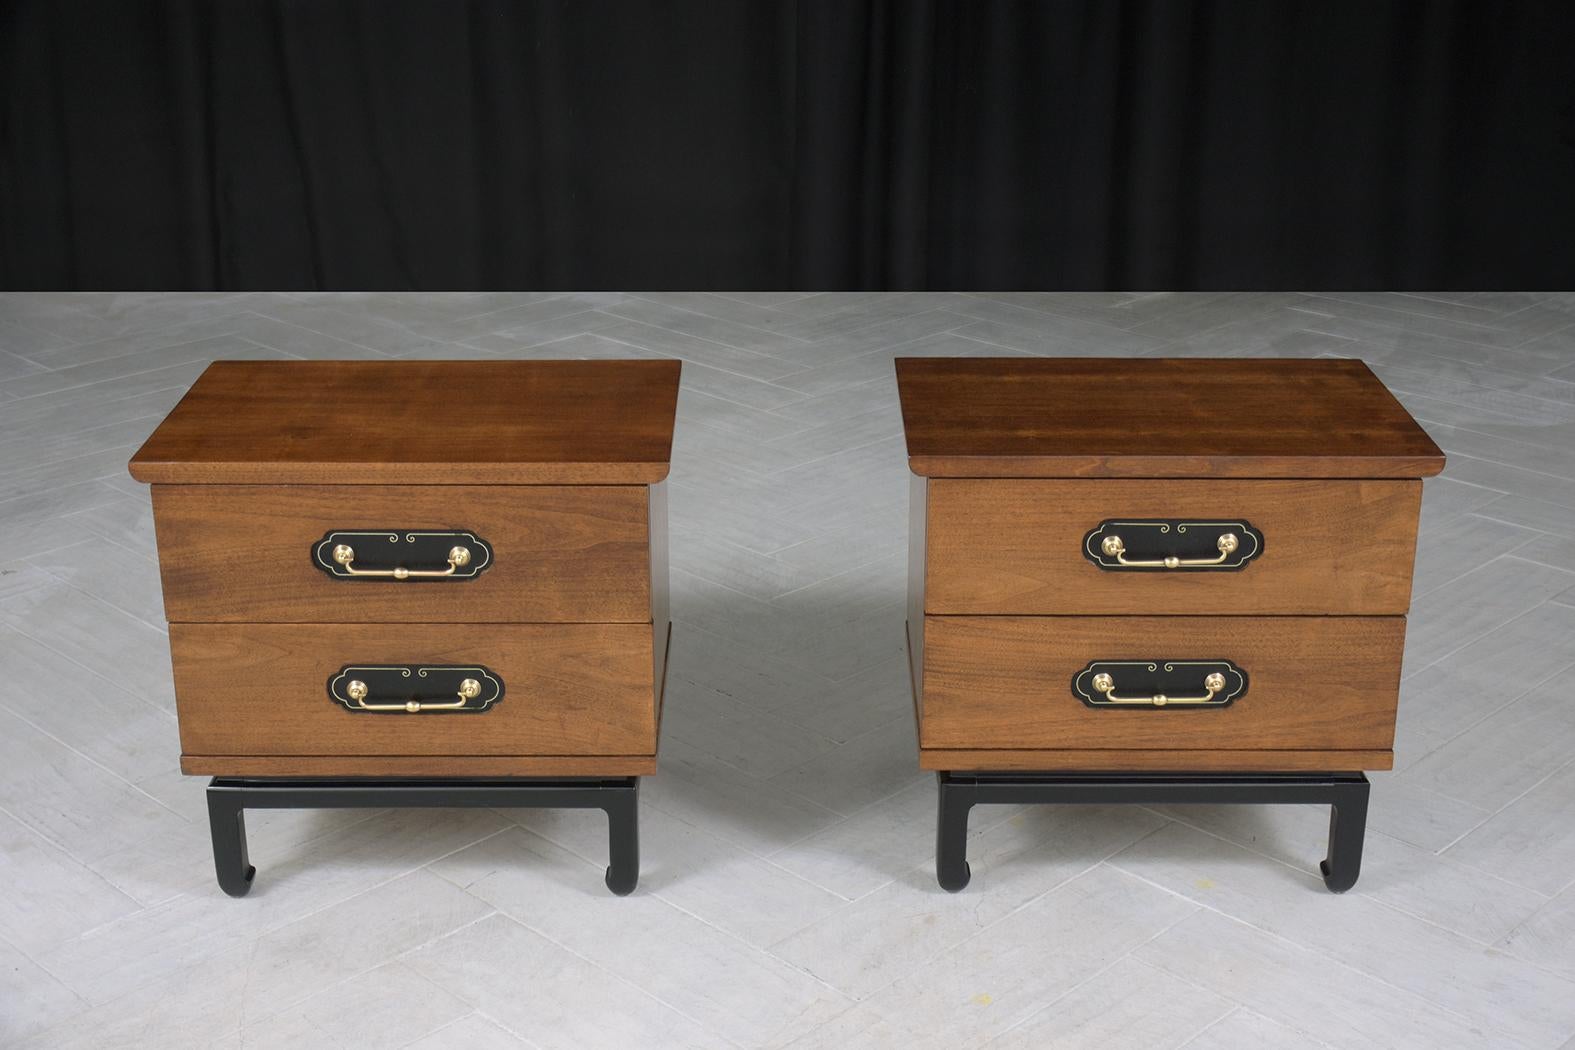 Step back into the stylish era of the 1960s with this exceptional pair of American of Martinsville nightstands, masterfully hand-crafted from walnut wood and brought back to life with a full restoration and refinishing by our dedicated professional